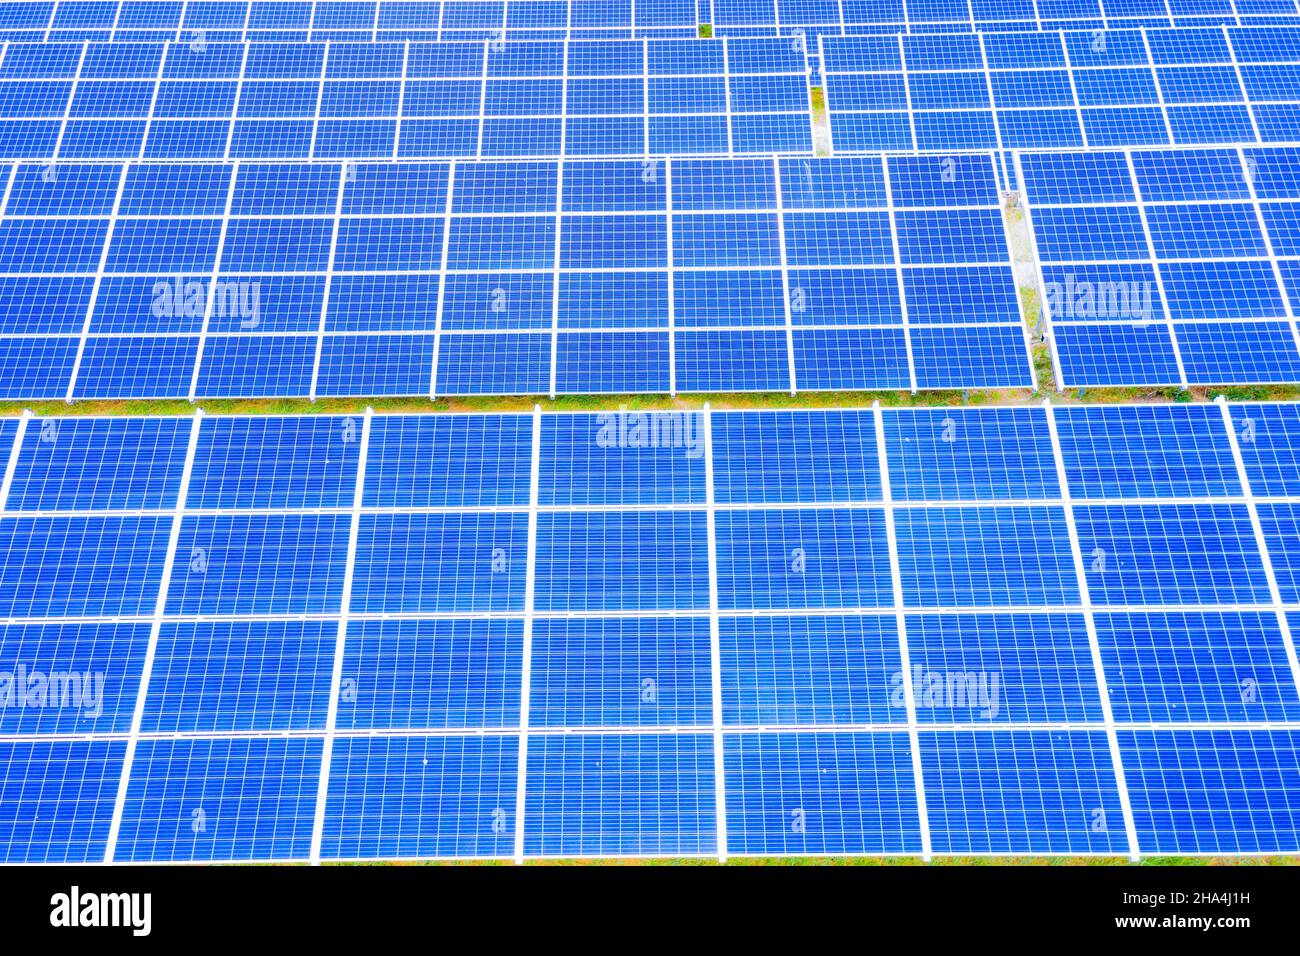 Renewable Energy and Sustainable Development / Park of Photovoltaic Solar Panels . Aerial view of Solar panels Photovoltaic systems industrial landsca Stock Photo